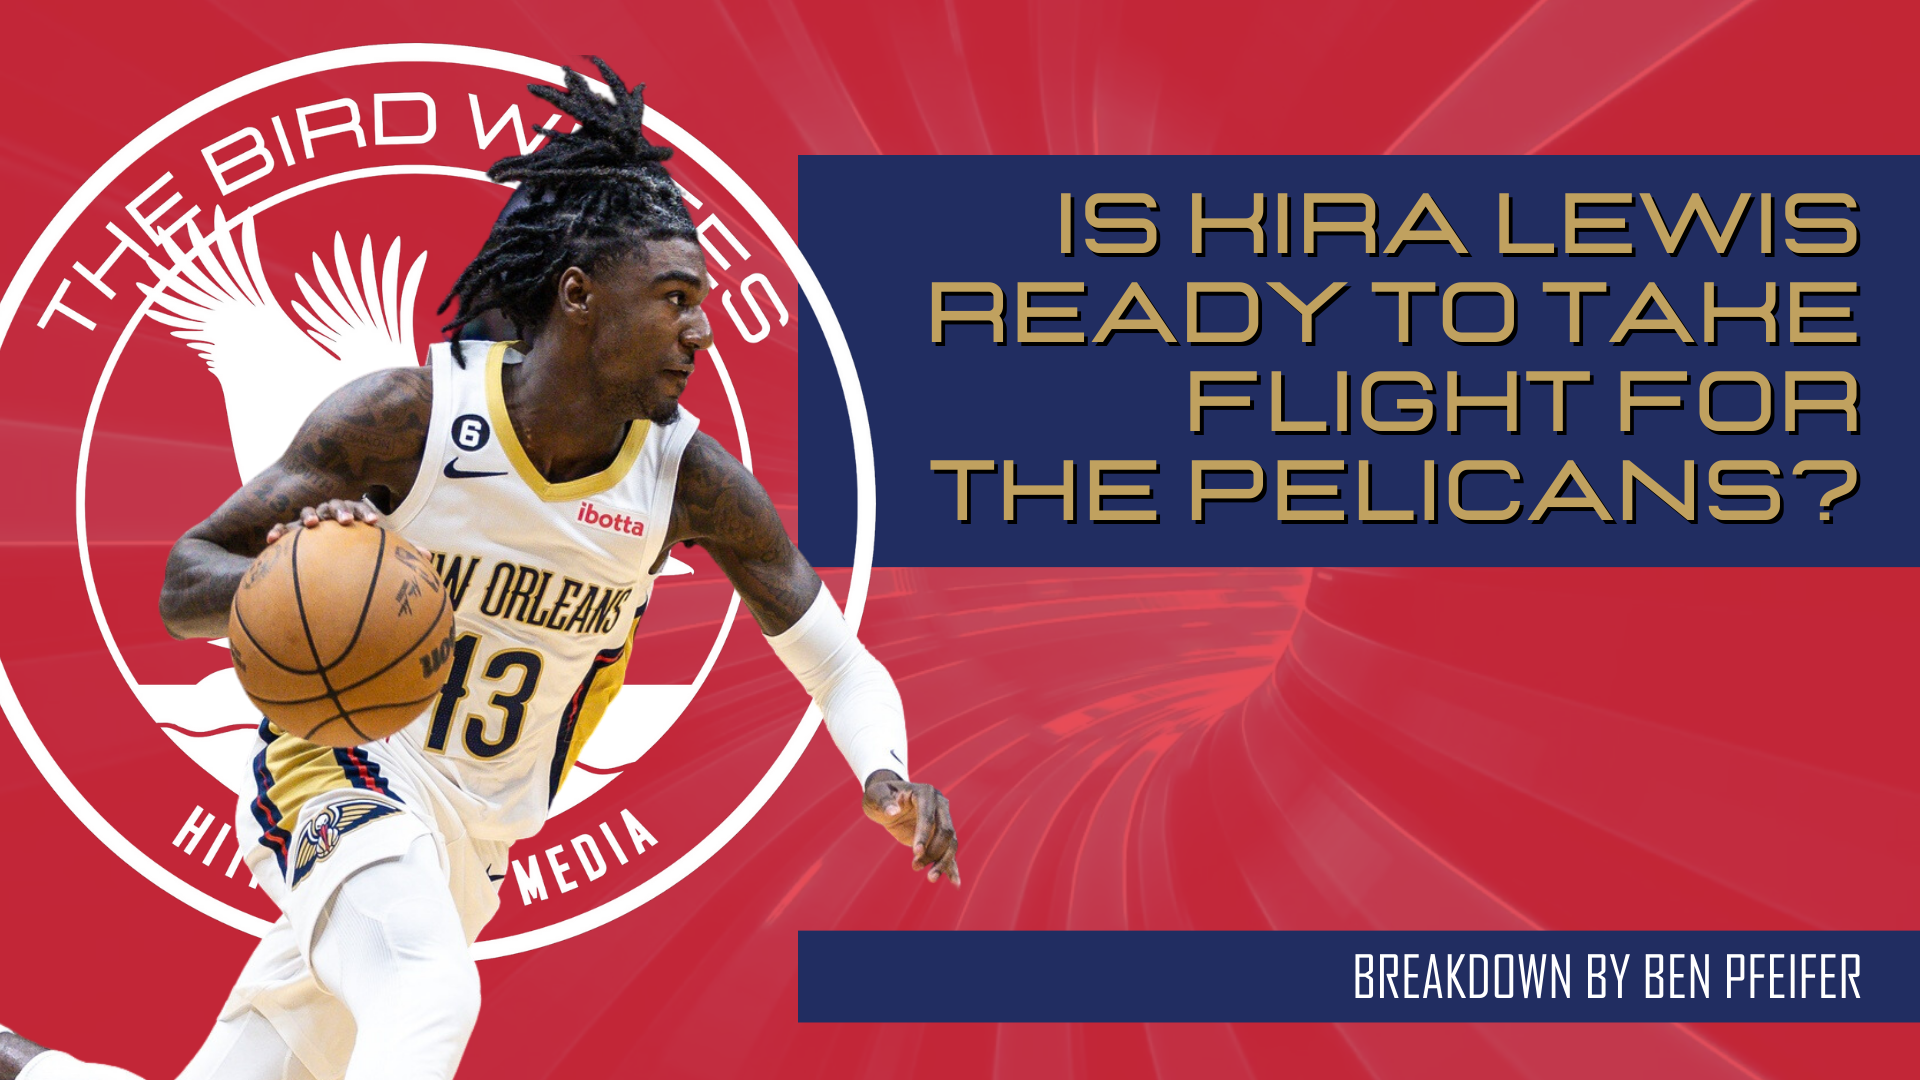 Is Kira Lewis Jr. Ready To Take Flight For The Pelicans?